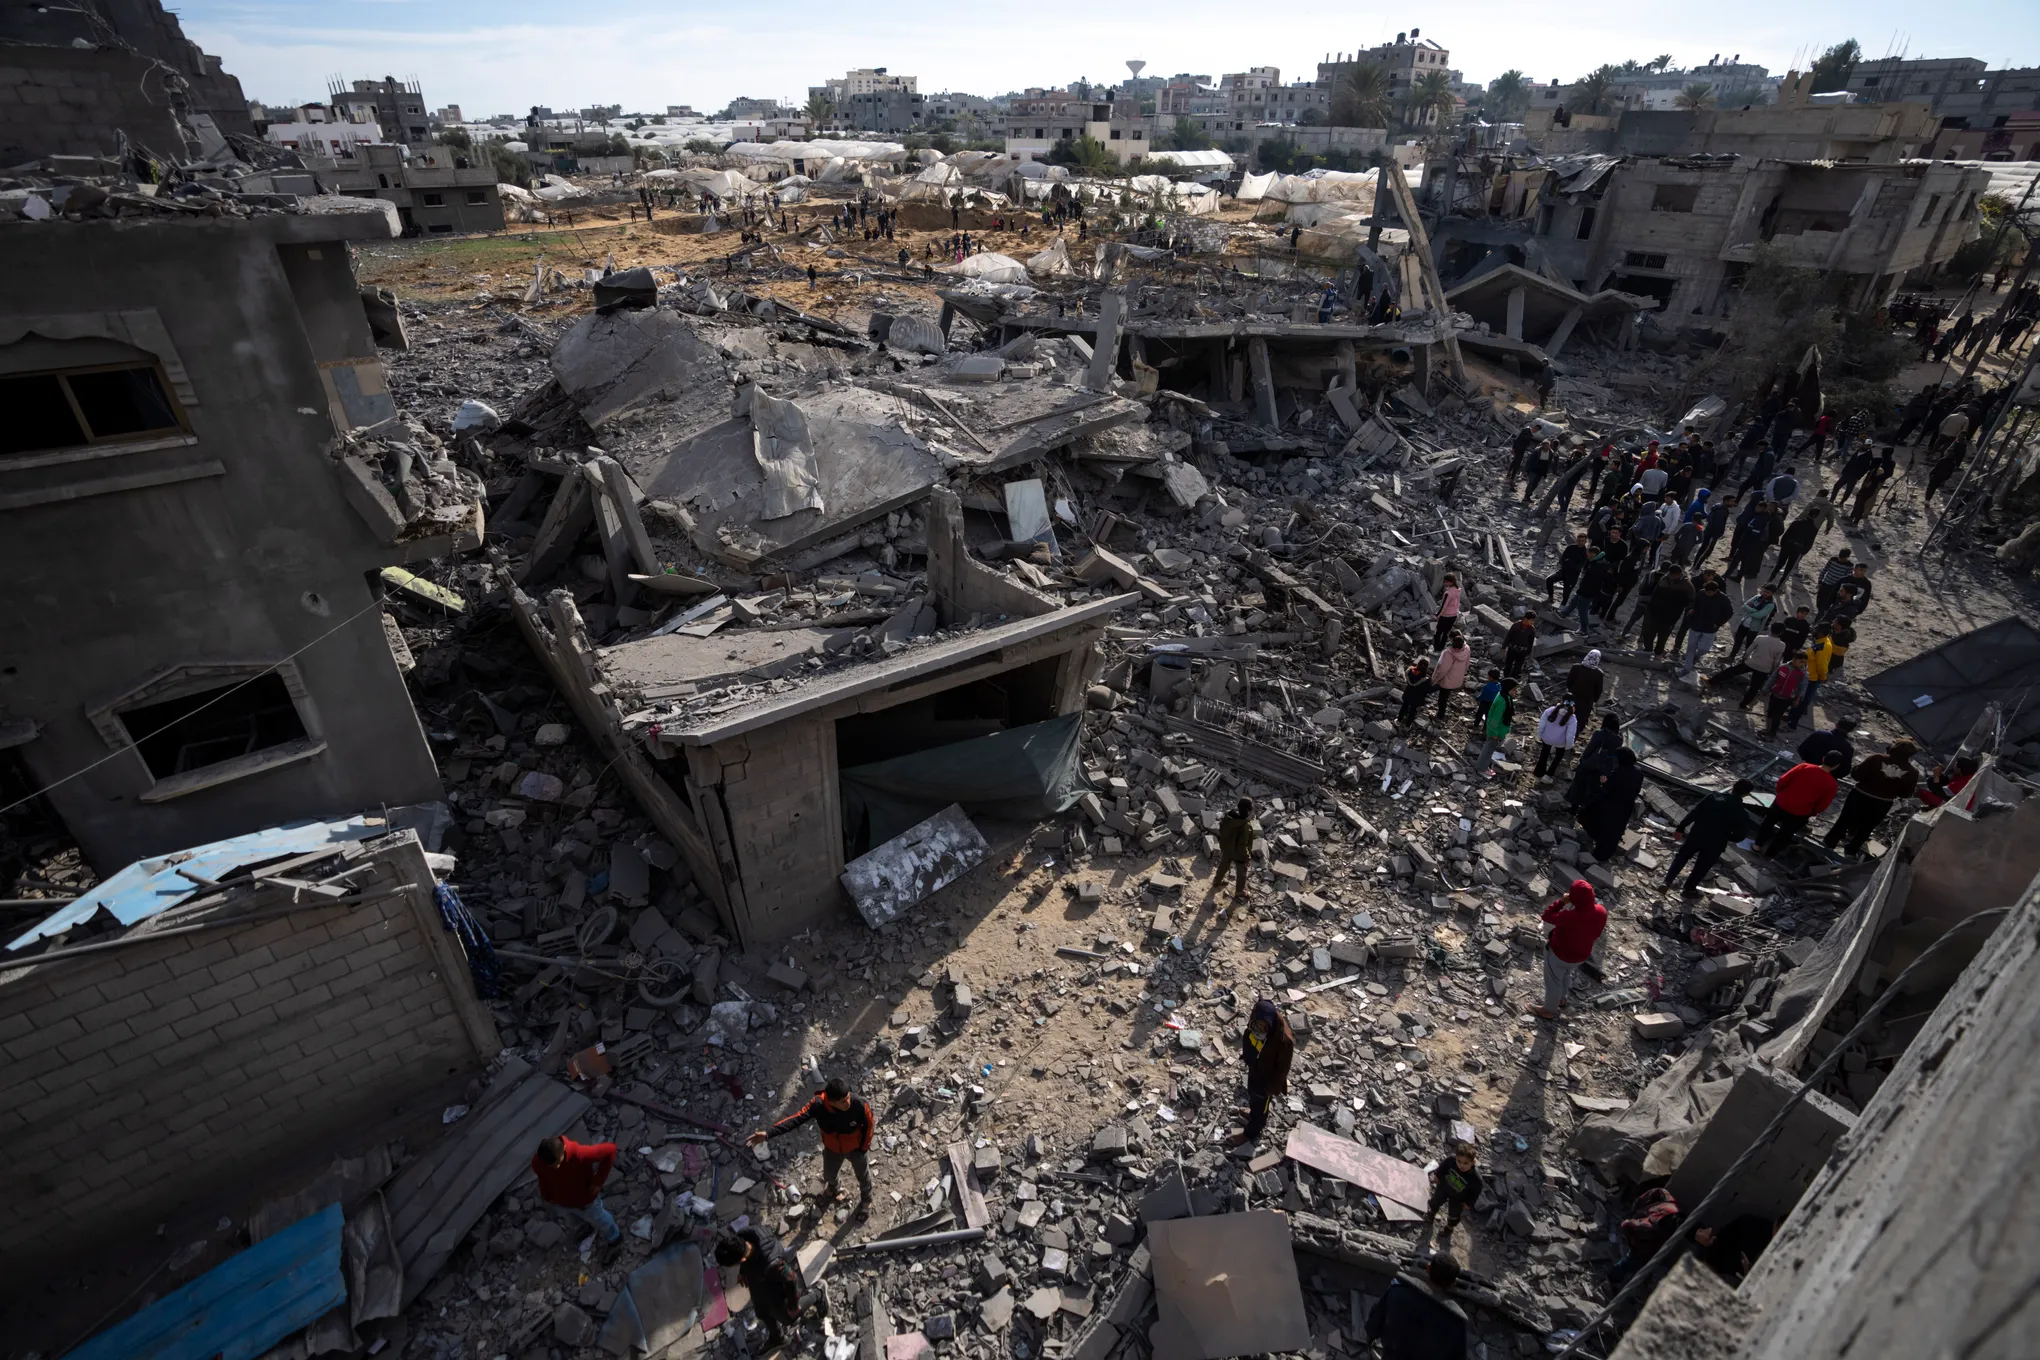  Israeli Rescue Operation in Gaza: 12,300 Palestinian Minors Killed Amidst Ongoing Conflict